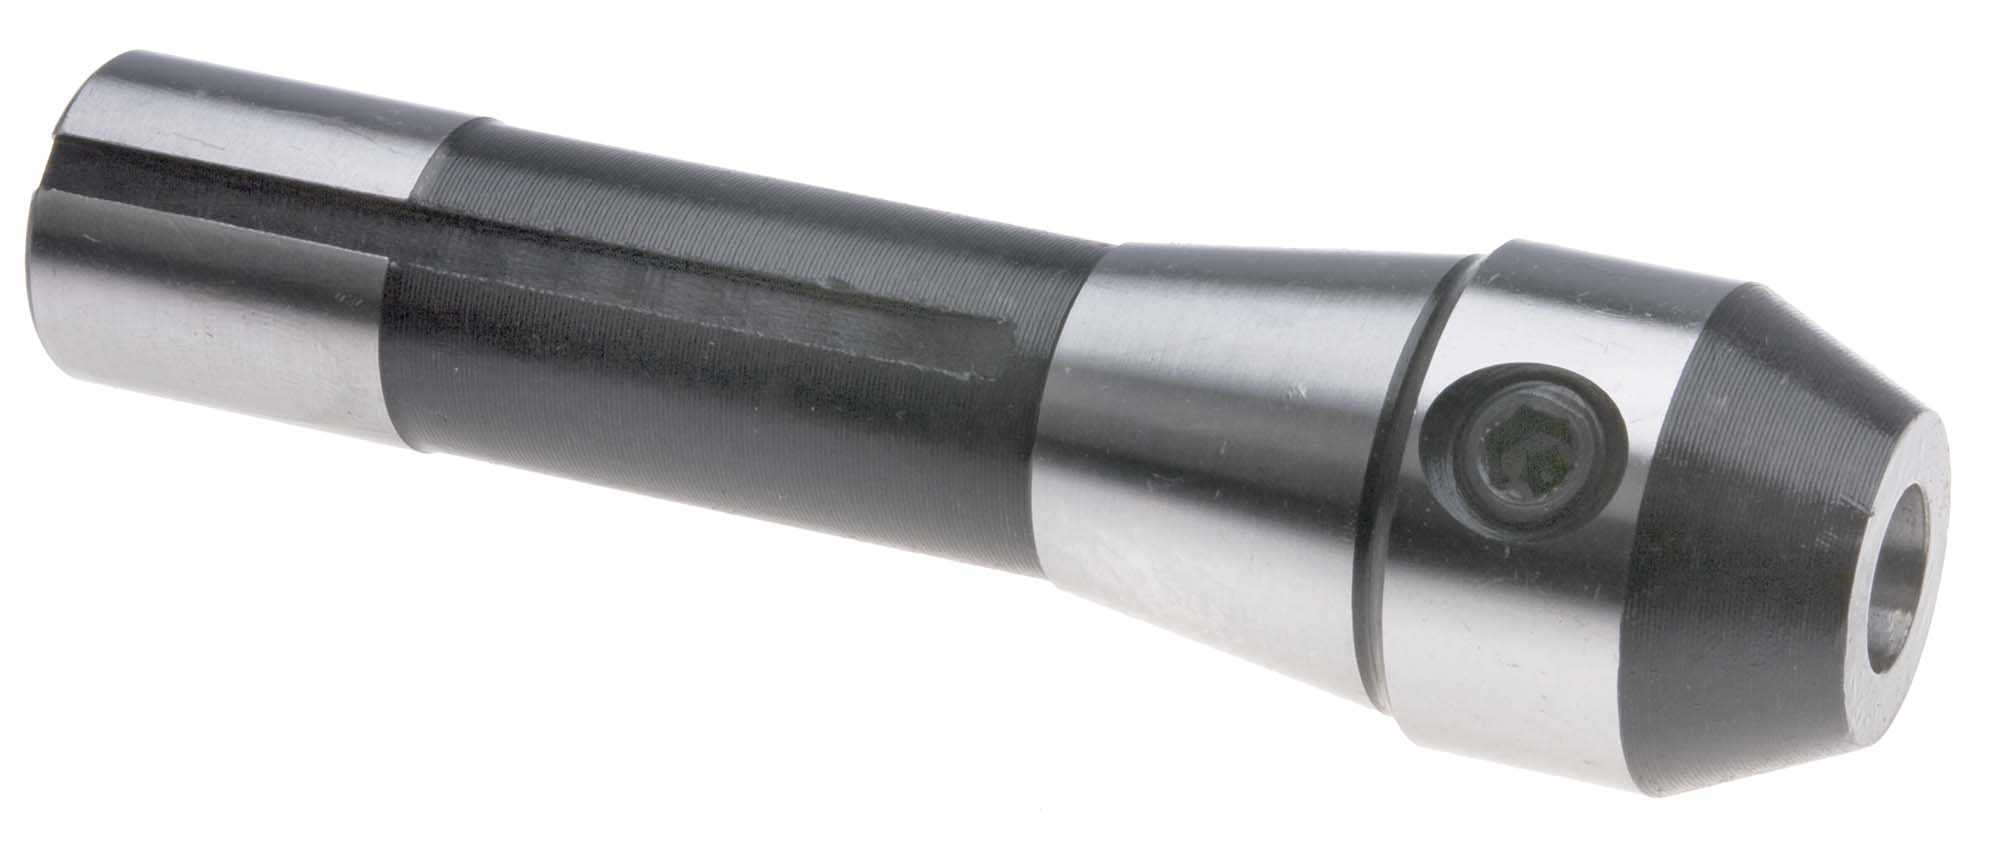 3/16" R8 End Mill Adapter